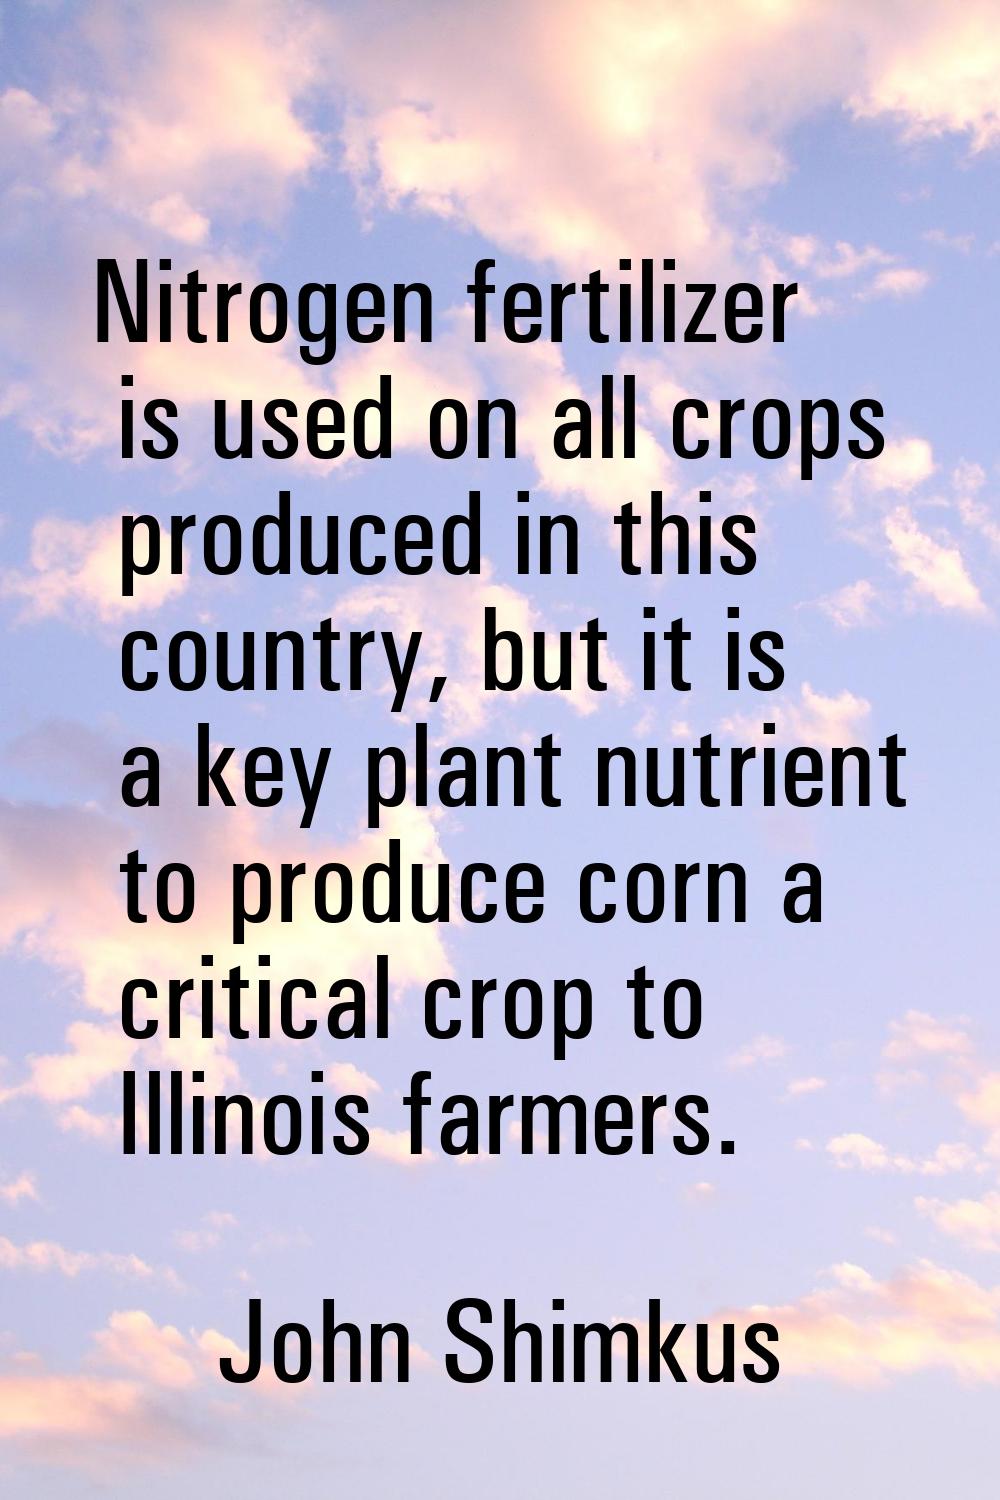 Nitrogen fertilizer is used on all crops produced in this country, but it is a key plant nutrient t